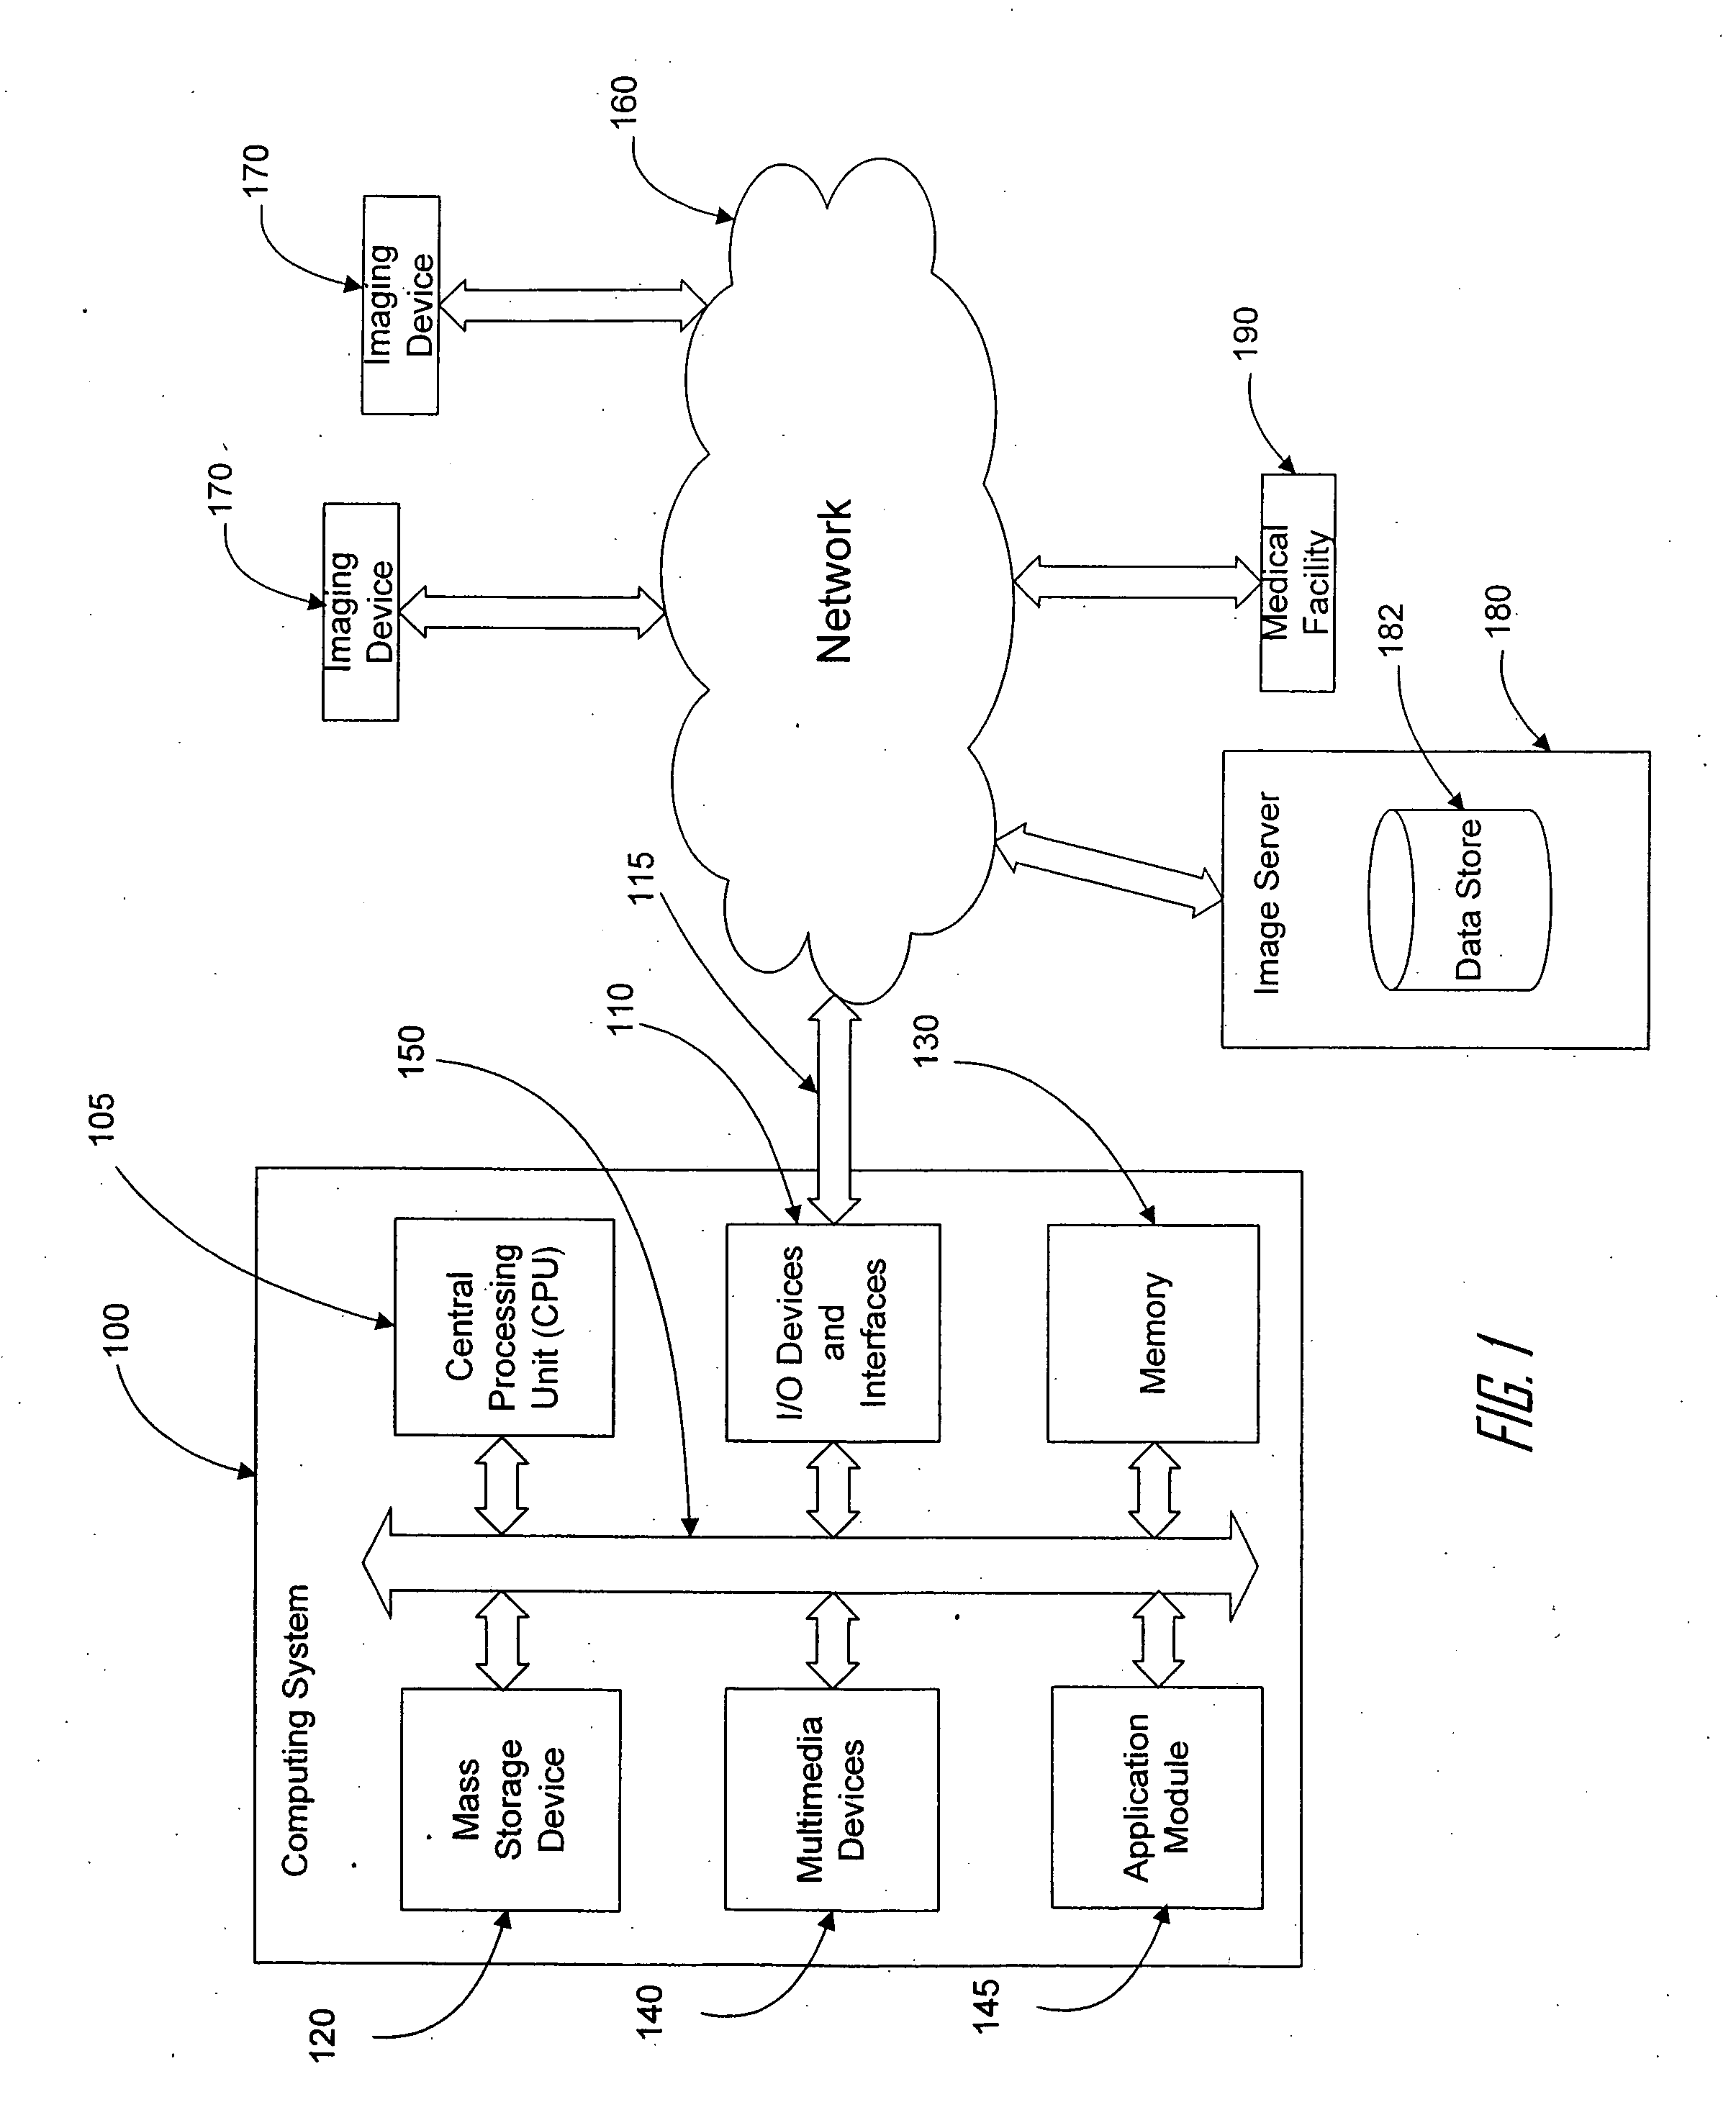 Systems and methods for viewing medical images